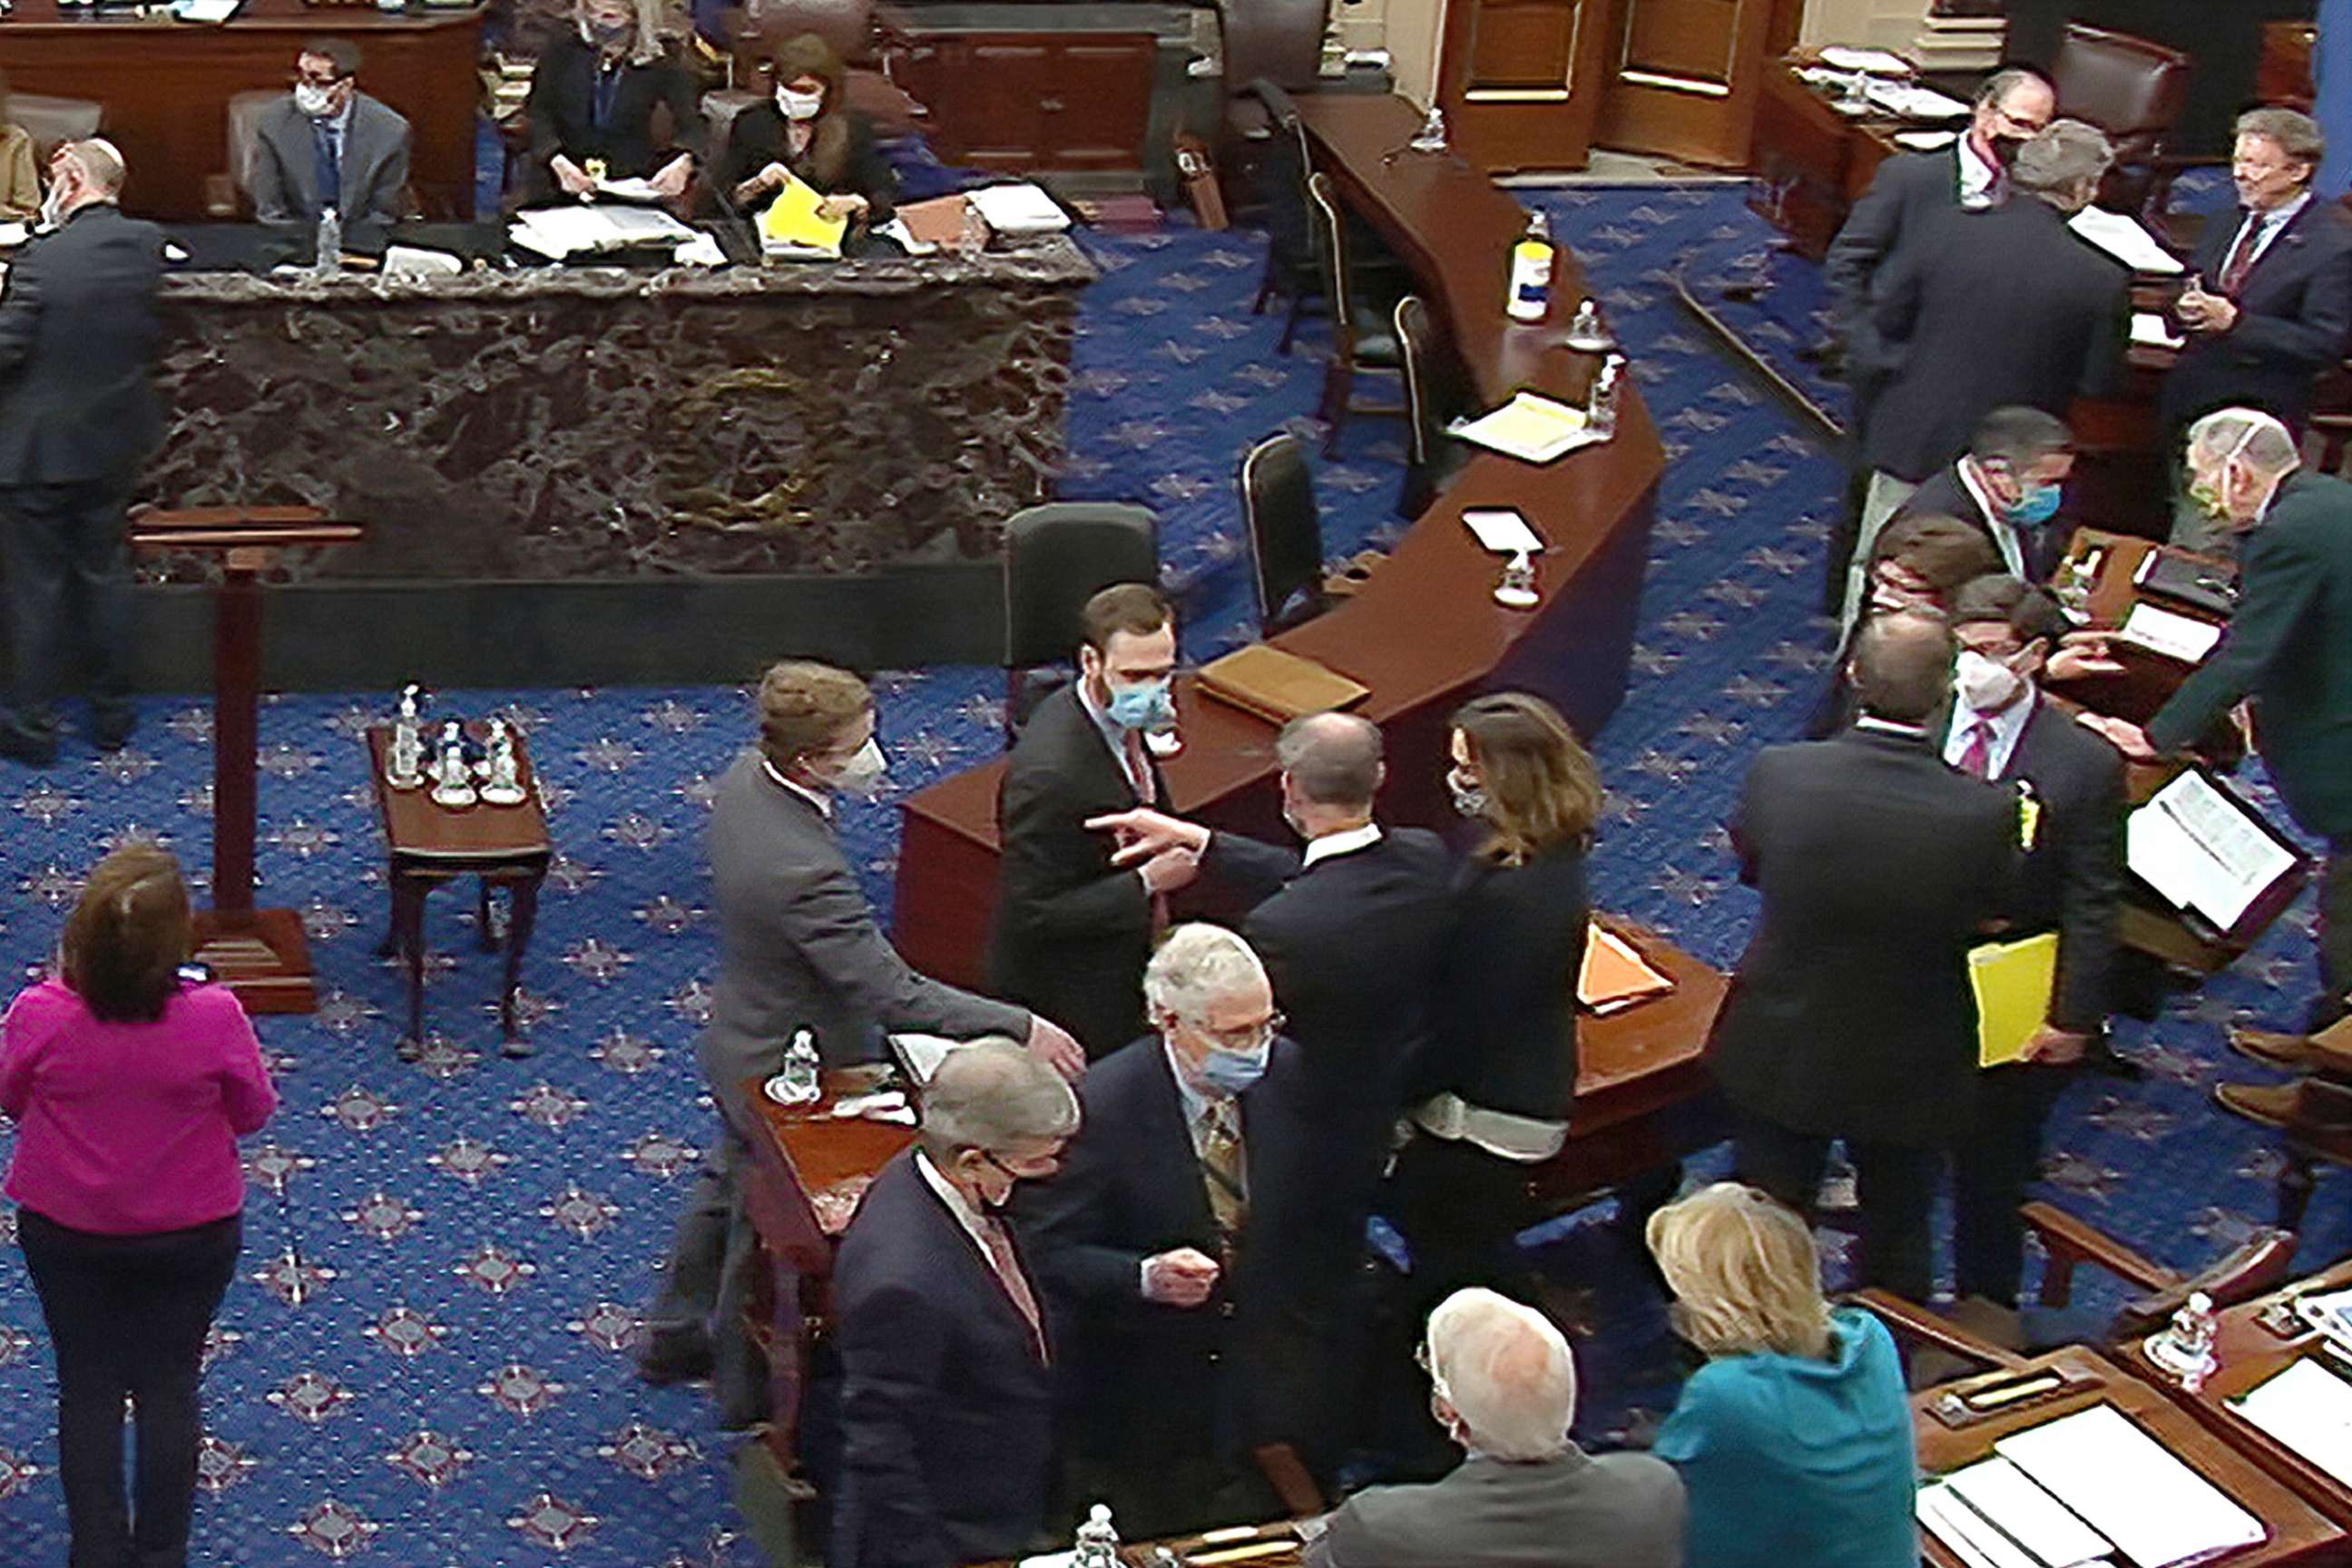 PHOTO: Senate Minority Leader Mitch McConnell and other Republican senators and staff talk on the floor after a vote on the motion to allow witnesses in the second impeachment trial of former President Donald Trump in the Senate. Feb. 13, 2021.